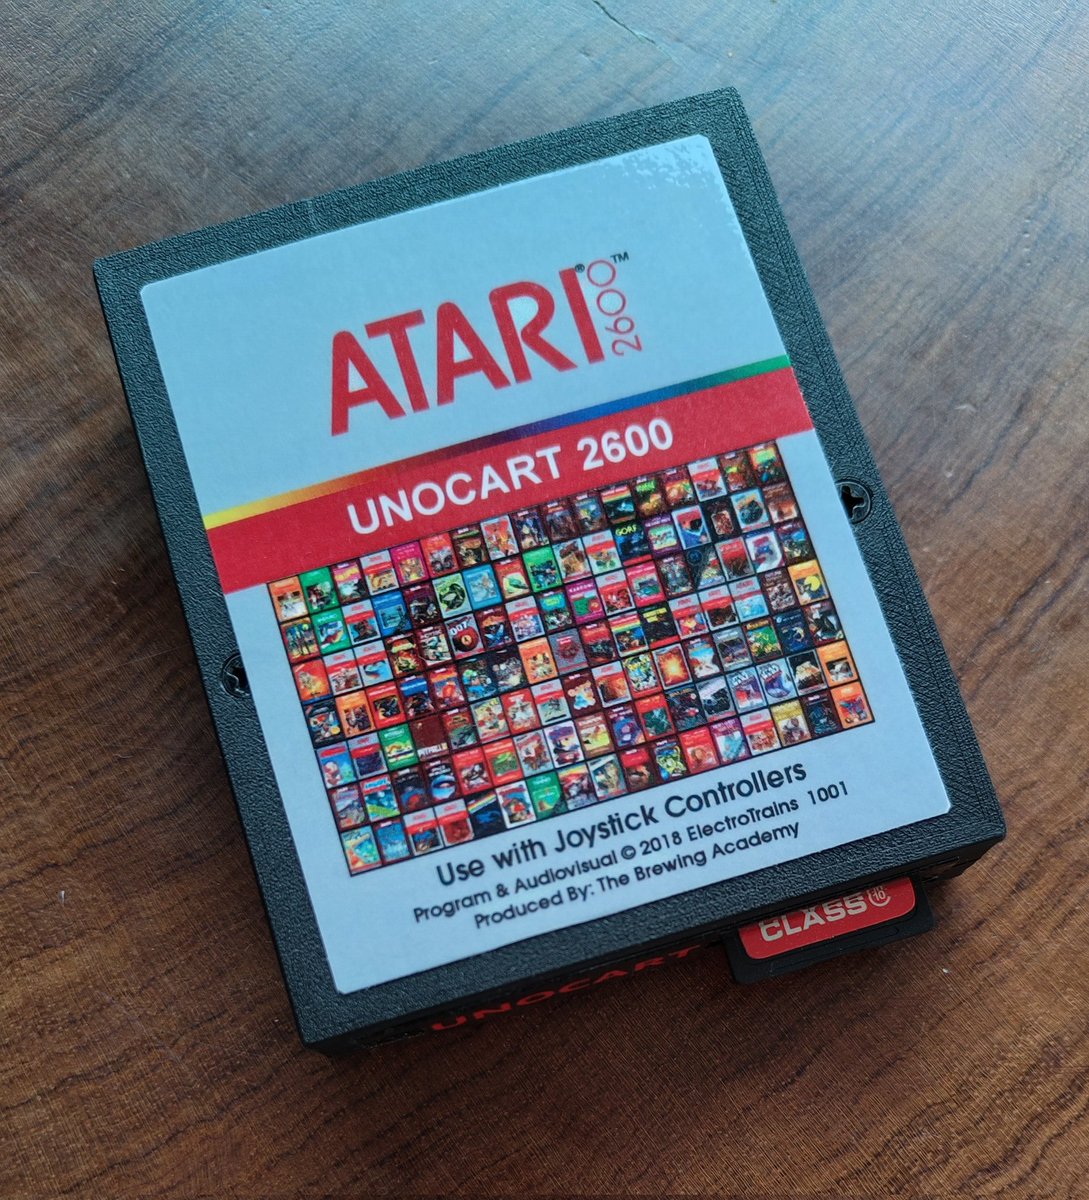 Got myself an Atari 2600 flash cart today. Traded it for a 'junk' Twin Famicom I still had lying around waiting to be fixed. Can't wait for the composite mod to arrive so I can play some Demon Attack on real hardware again.

#atari #atari2600 #retrorevival #junk #demonattack